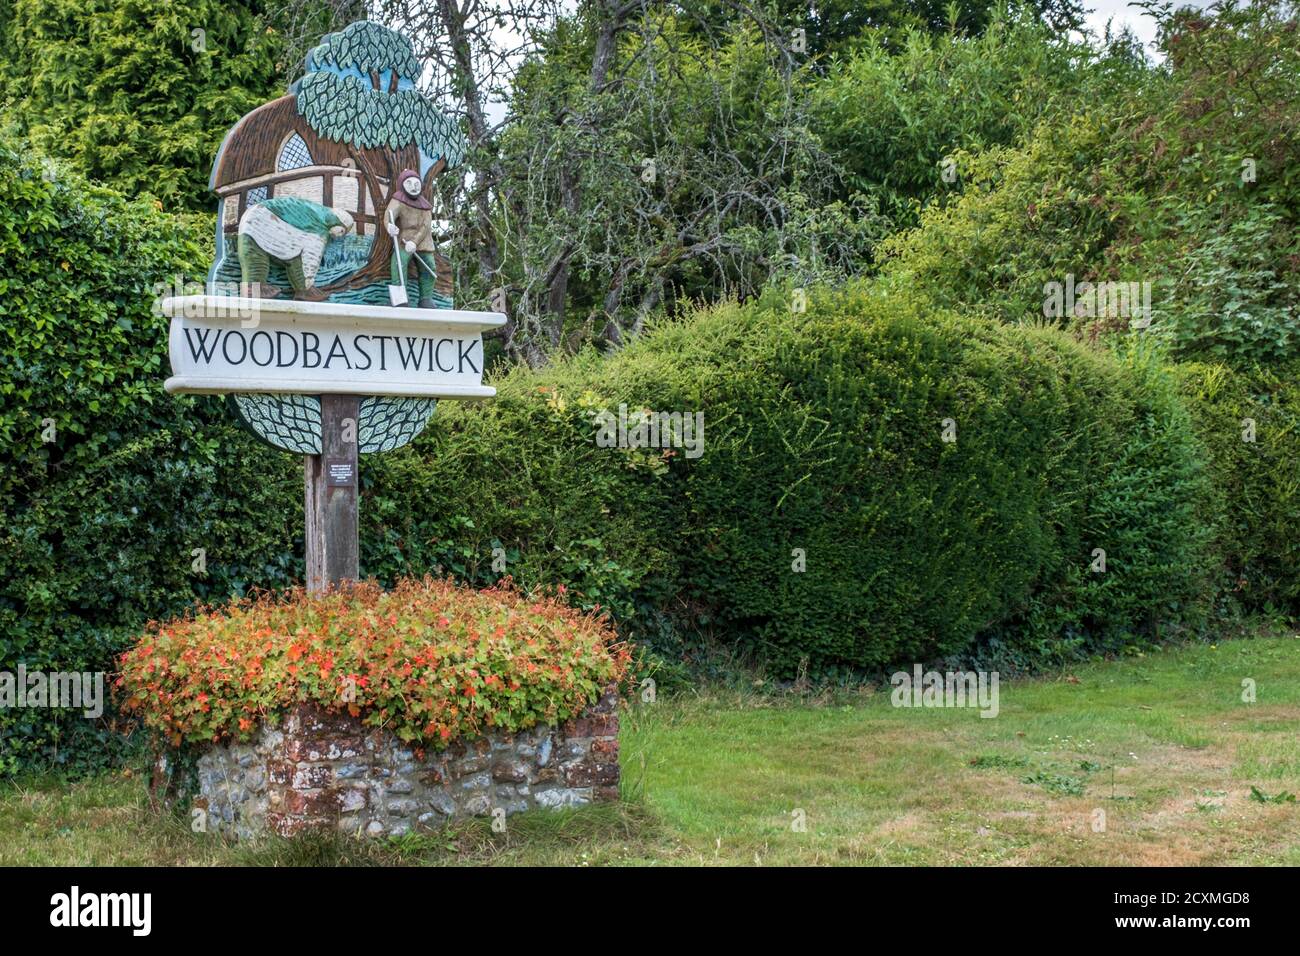 Woodbastwick village sign, showing two Danish and Saxon invaders tying their leggings. Norfolk Broads, England. Stock Photo